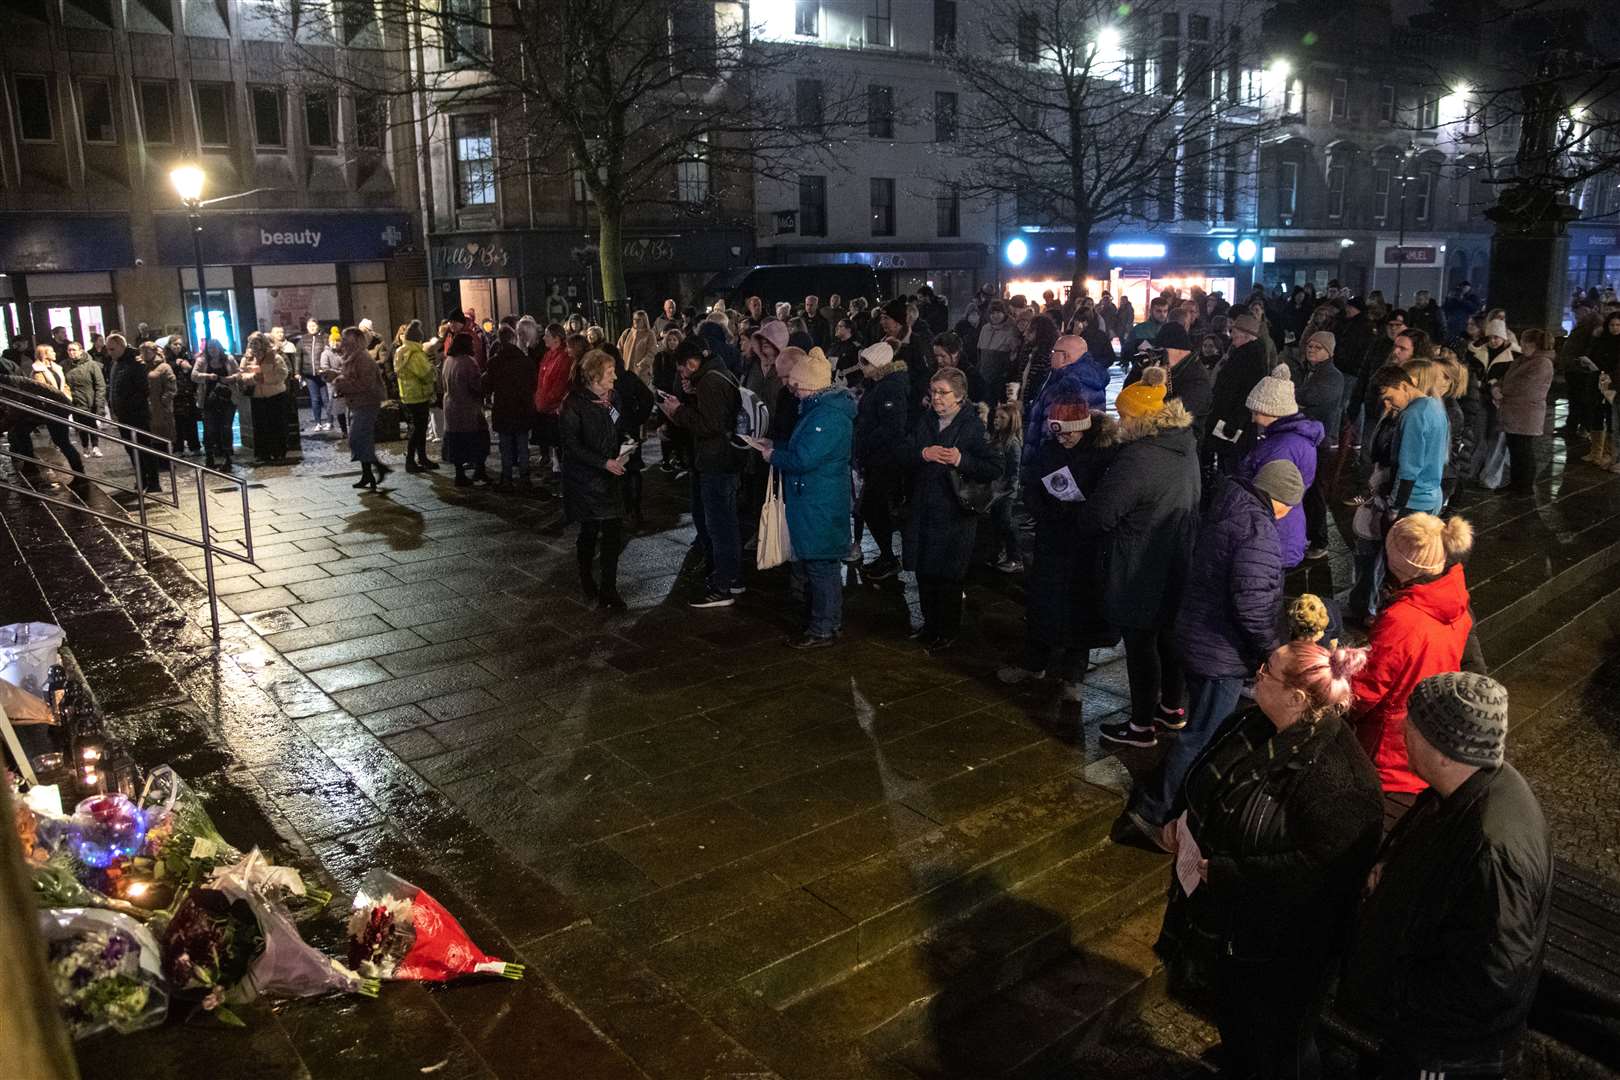 A vigil is held on the Plainstones in Elgin, outside St Giles' Church on Saturday night (February 11) in memory of Keith Rollinson. ..Picture: Daniel Forsyth..